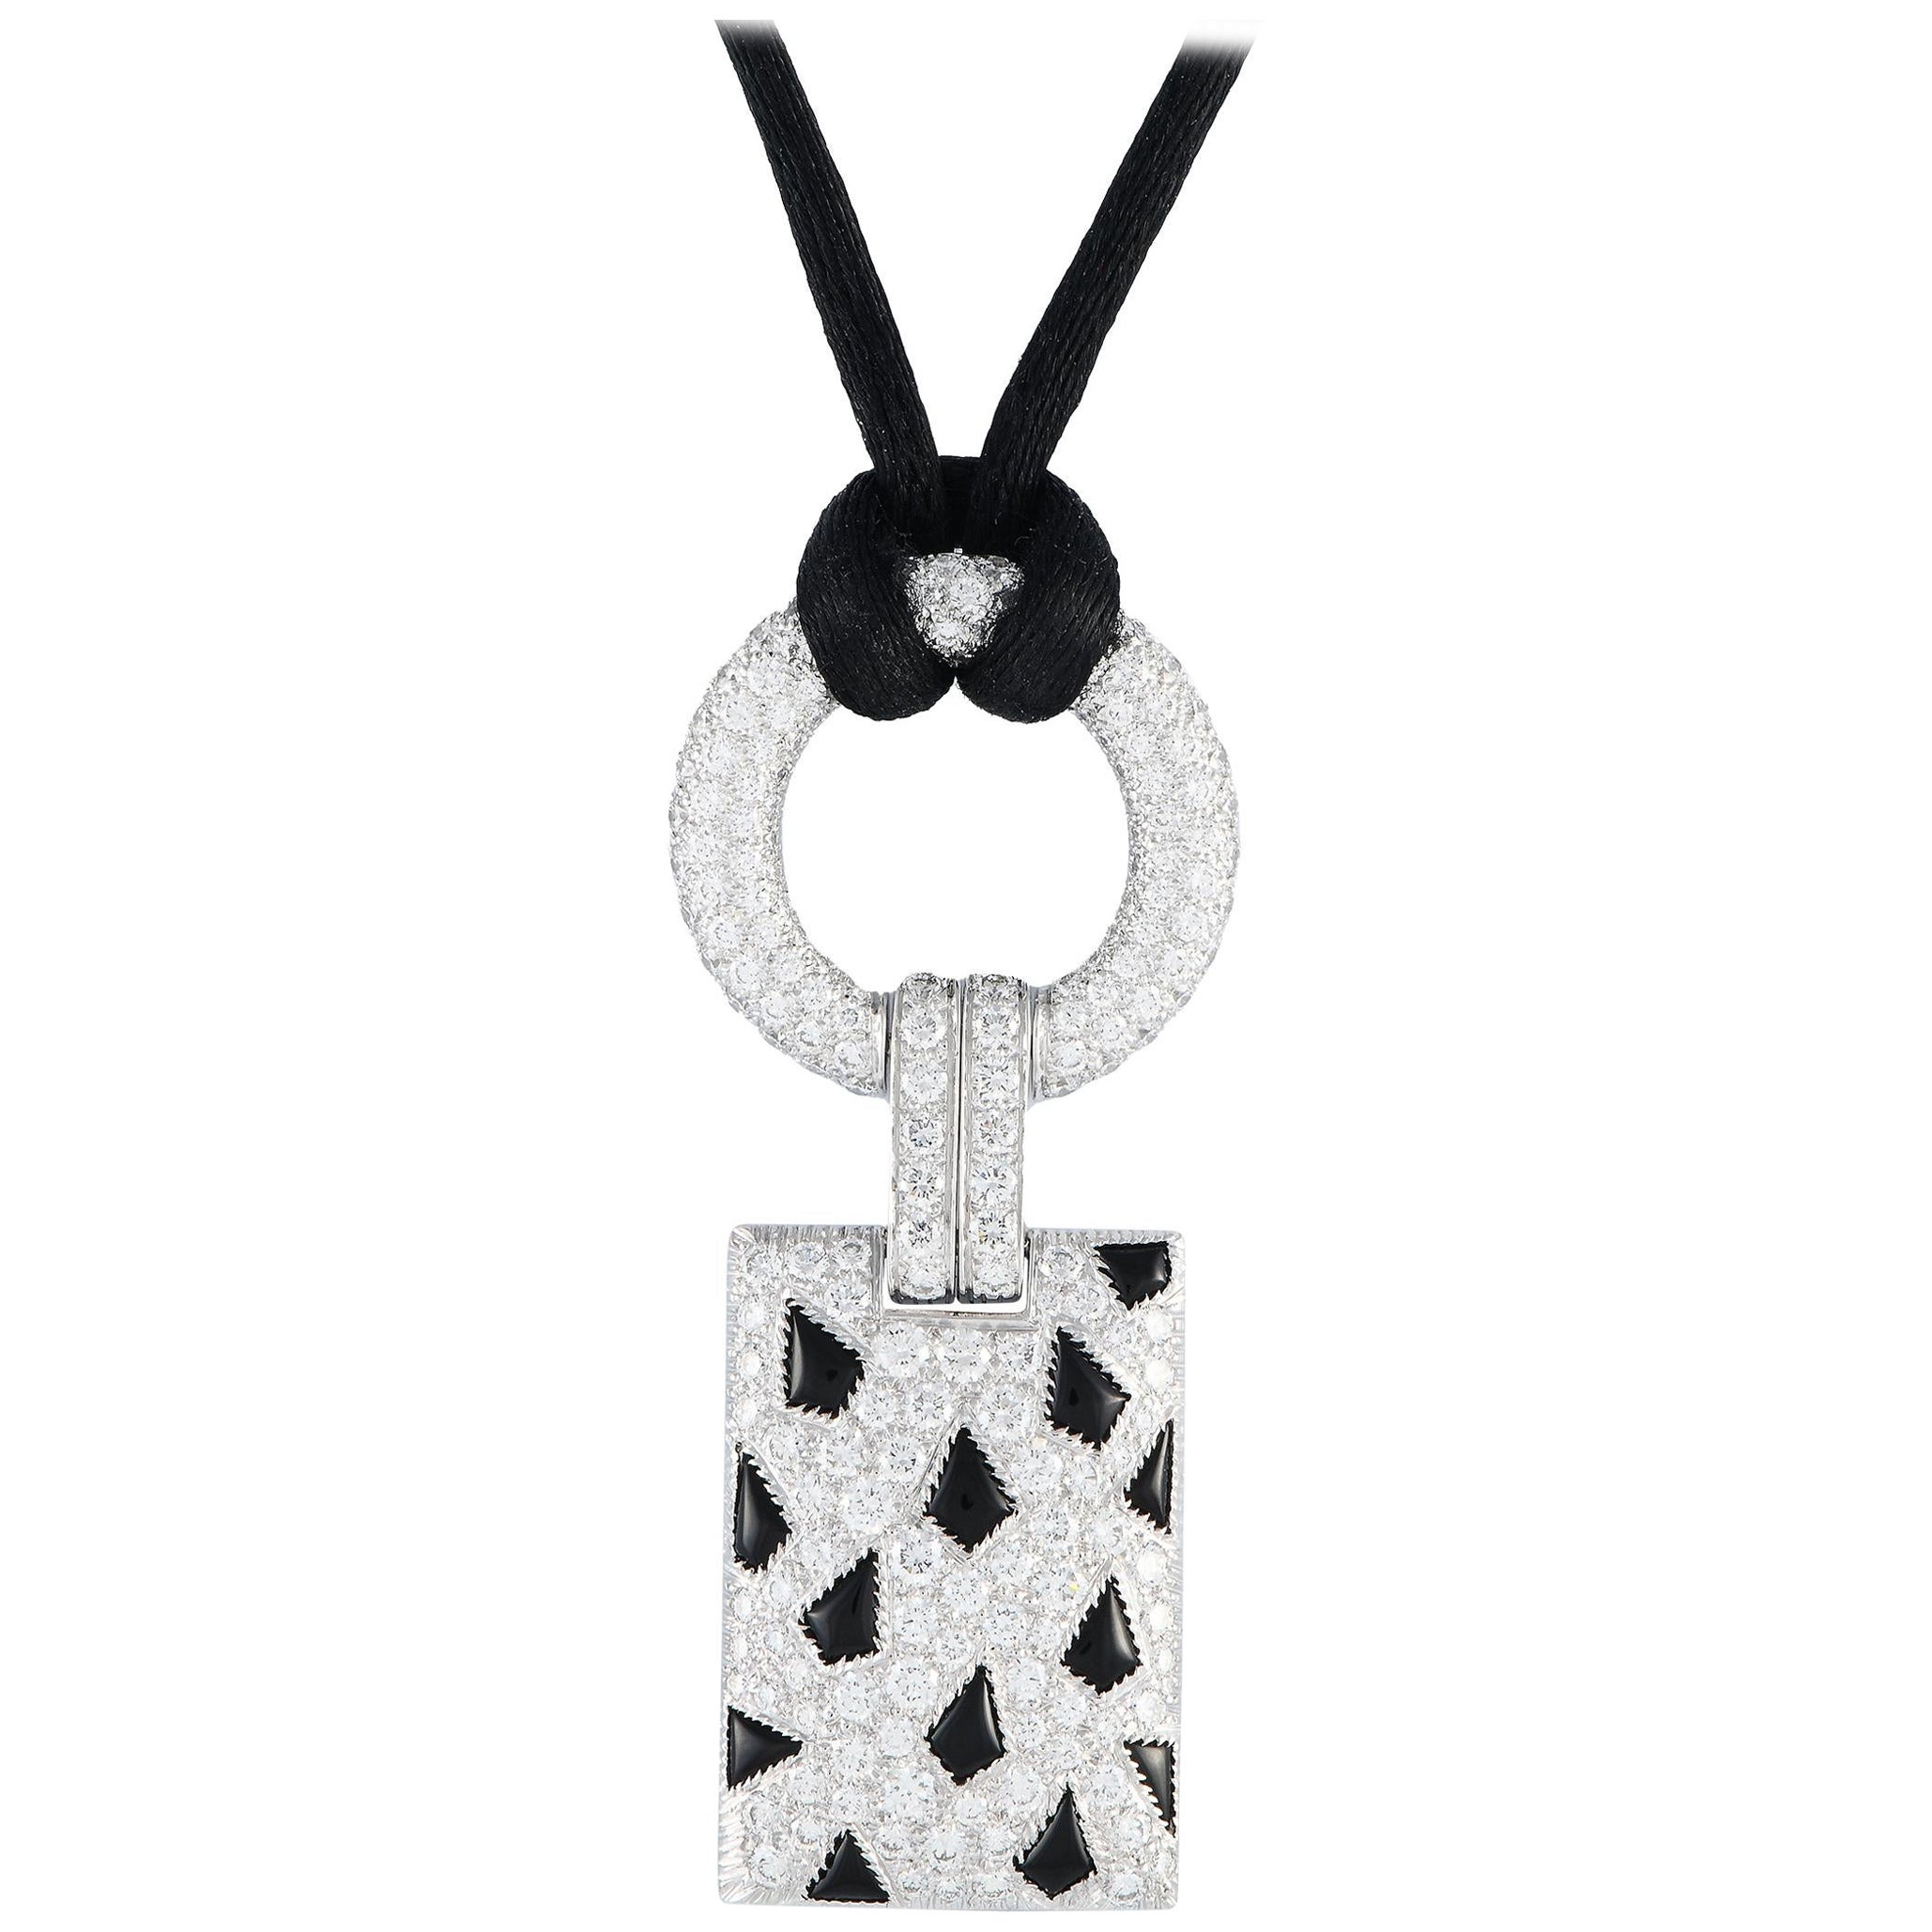 Cartier Panthere 18K White Gold 2.85ct Diamond and Onyx Pendant Necklace 